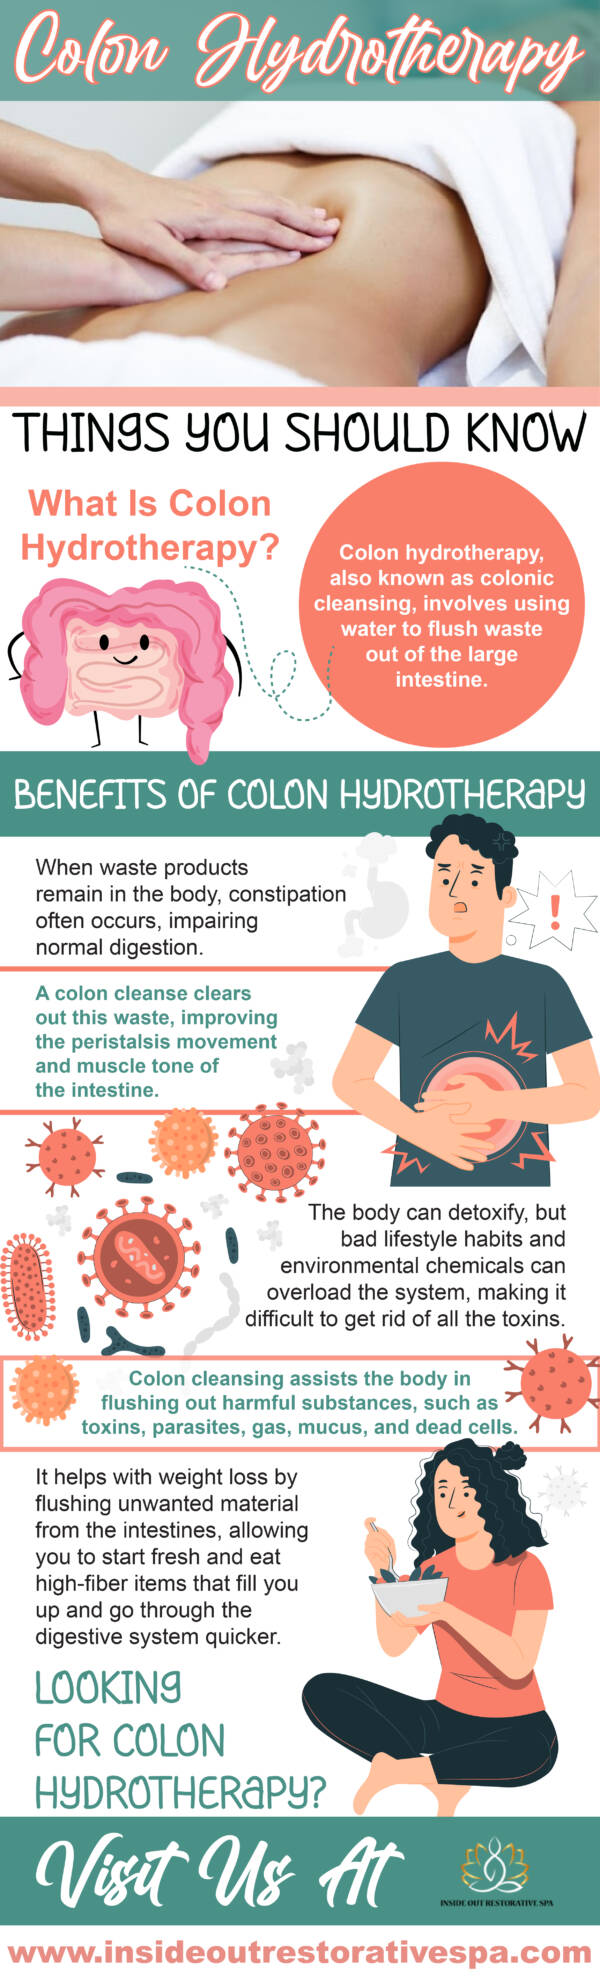 Colon Hydrotherapy Things You Should Know Infograph